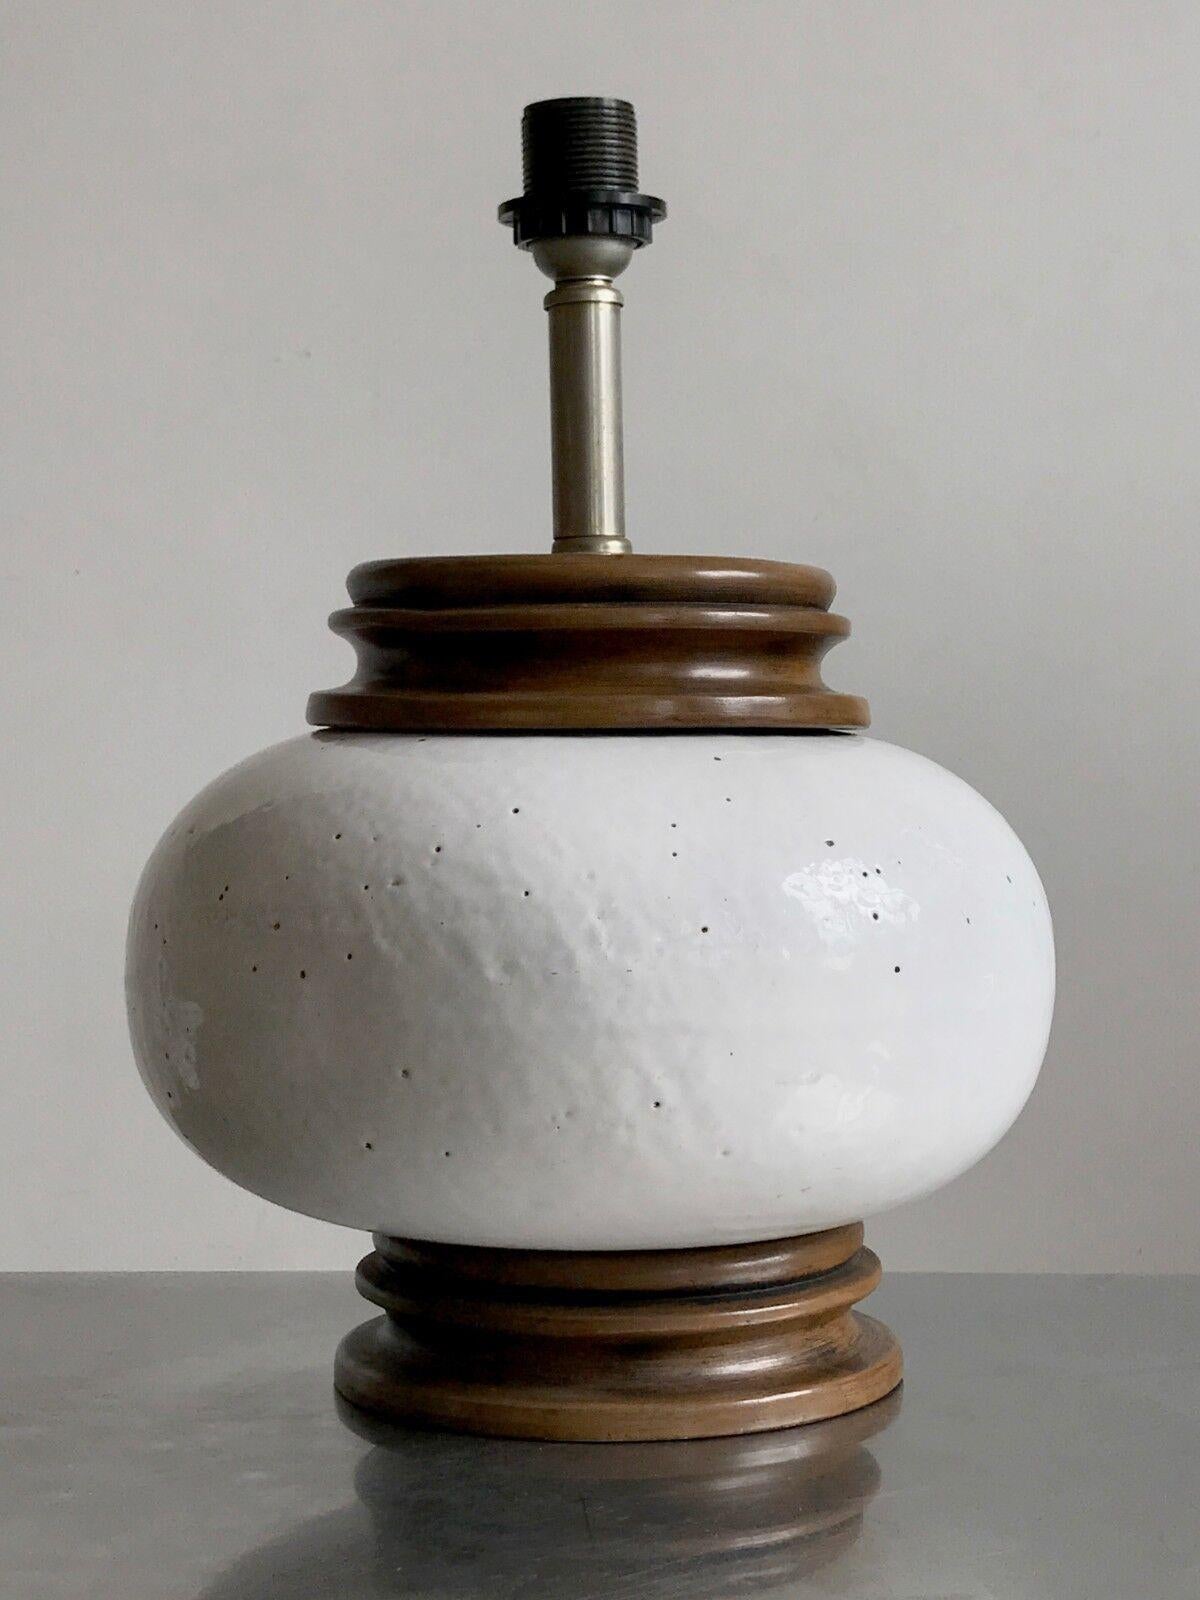 French A Huge BRUTALIST RUSTIC-MODERN Ceramic FLOOR or TABLE LAMP VALLAURIS France 1960 For Sale